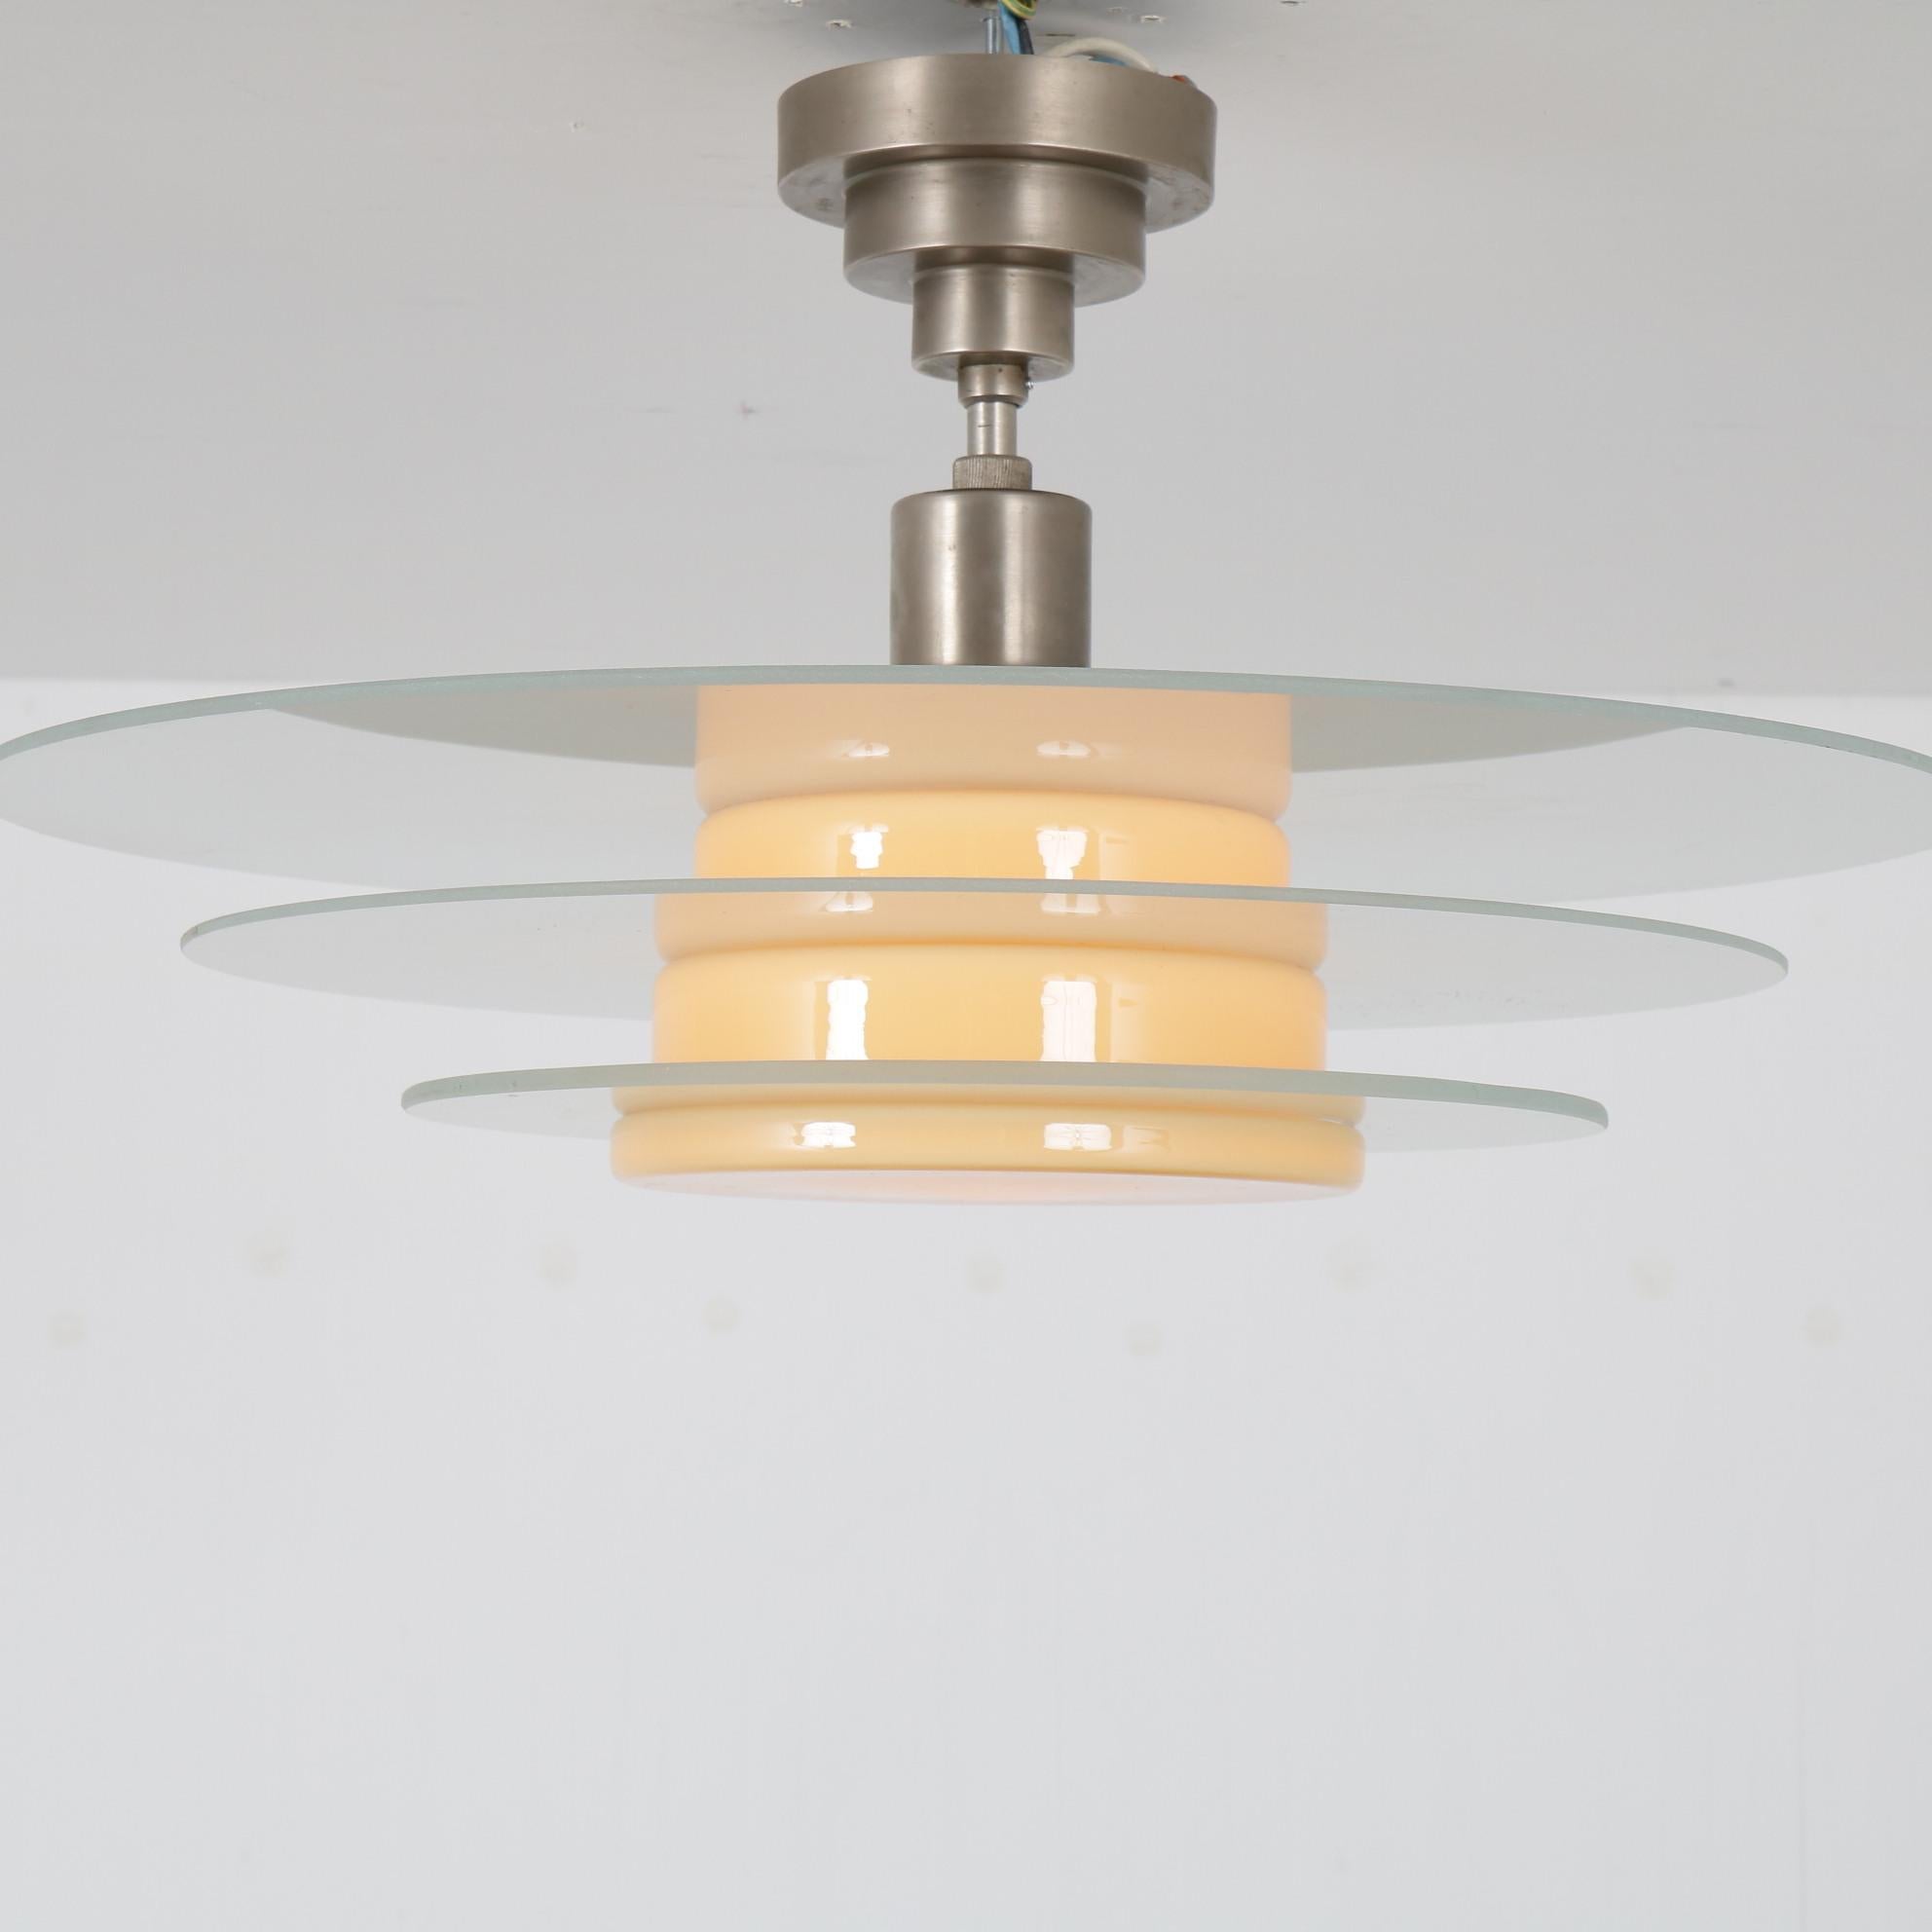 Bohlmarks Ceiling Lamp from Sweden, 1930 For Sale 4